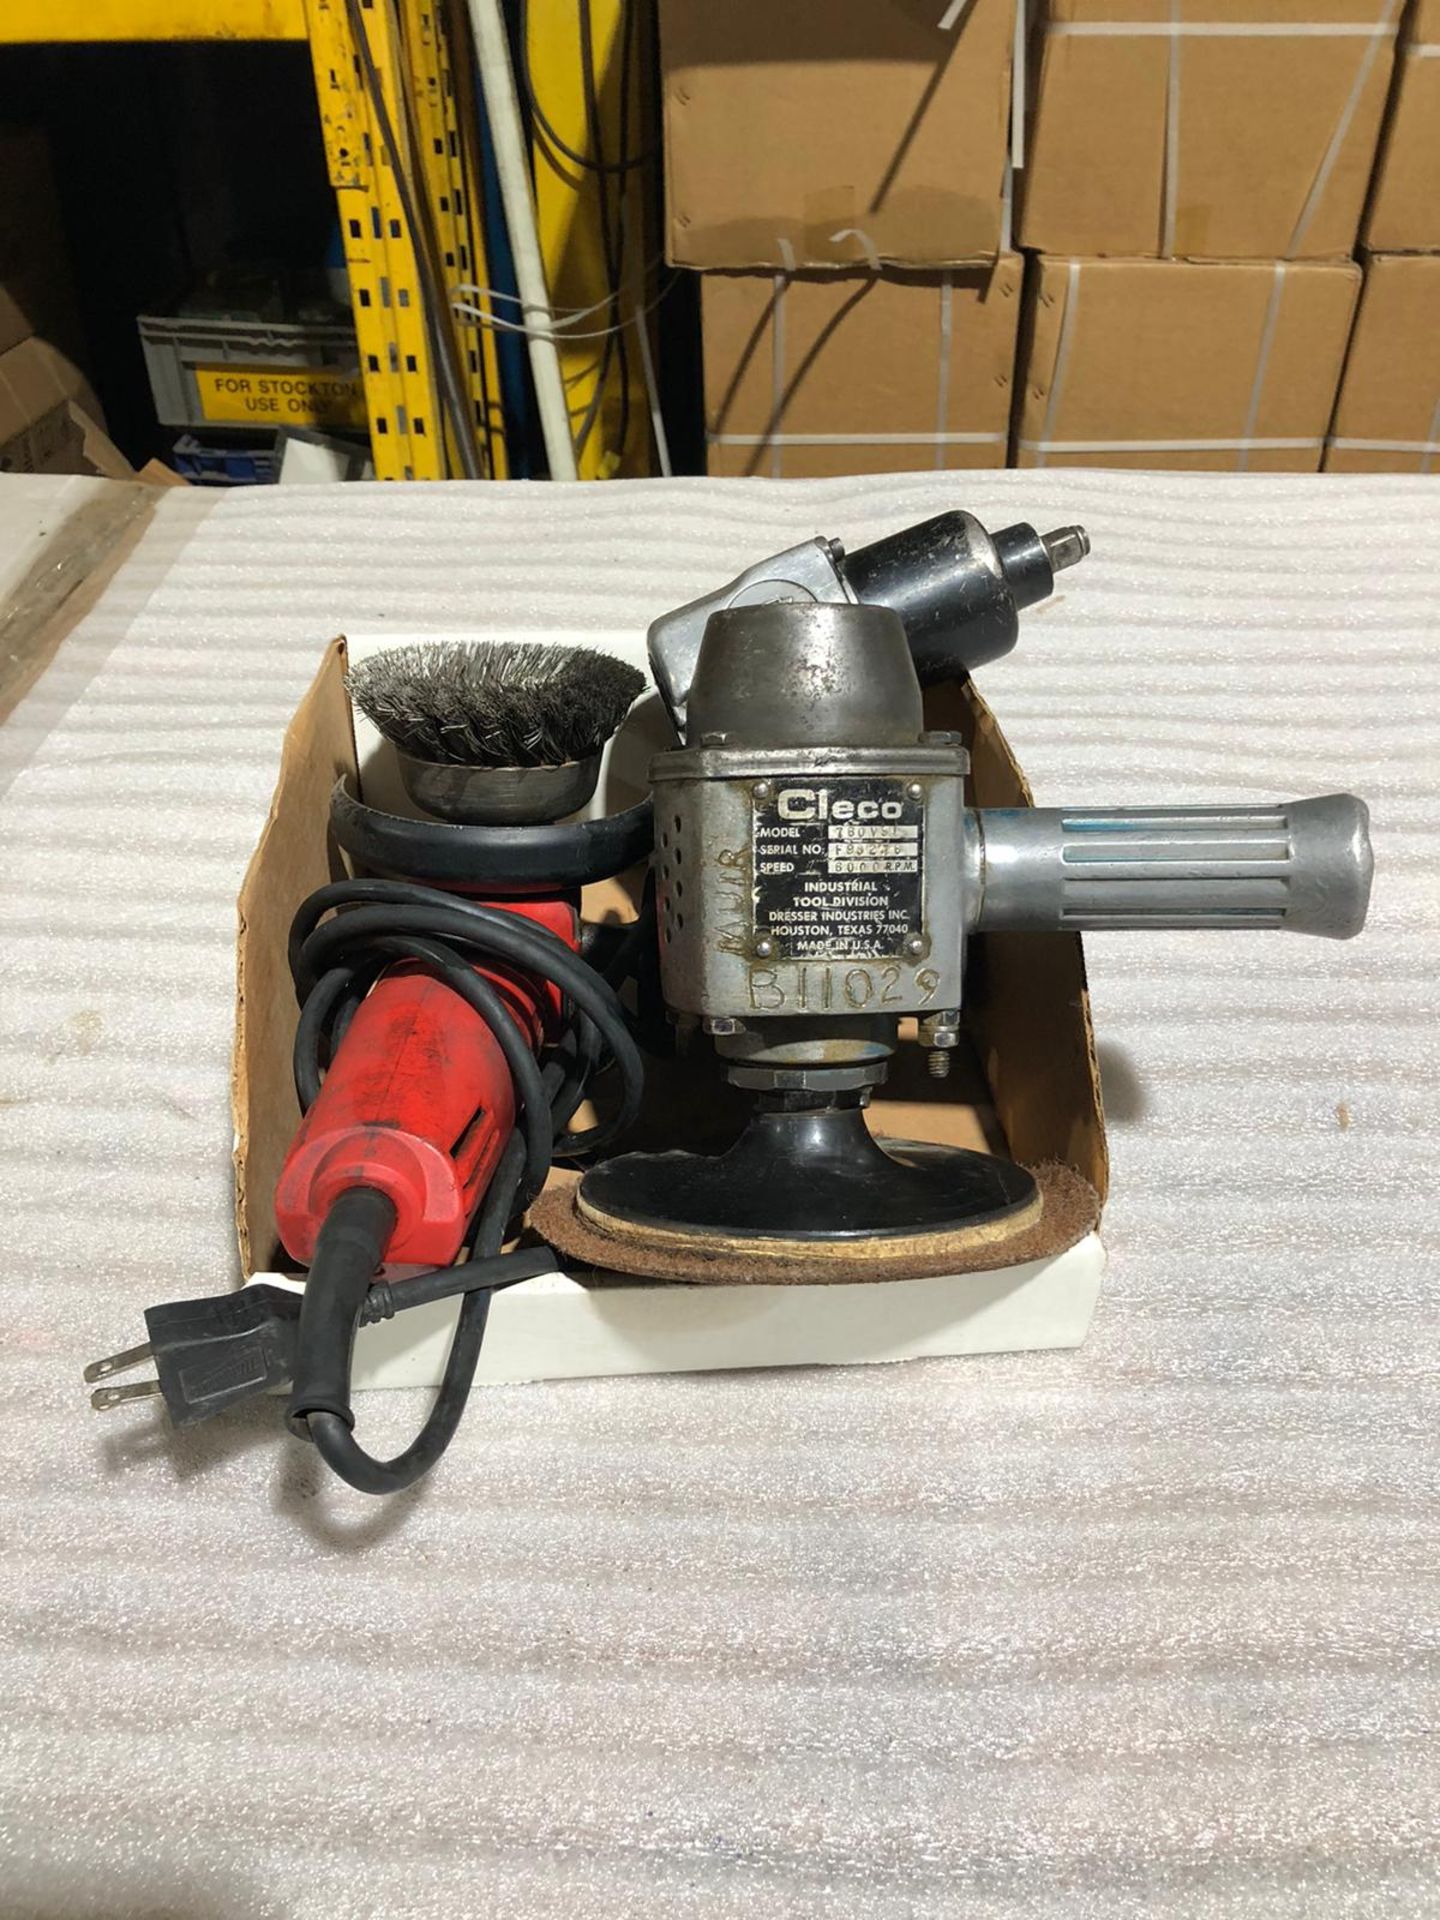 Lot of 3 (3 units) Milwaukee Grinder, Cleco Sander and Impact Wrench